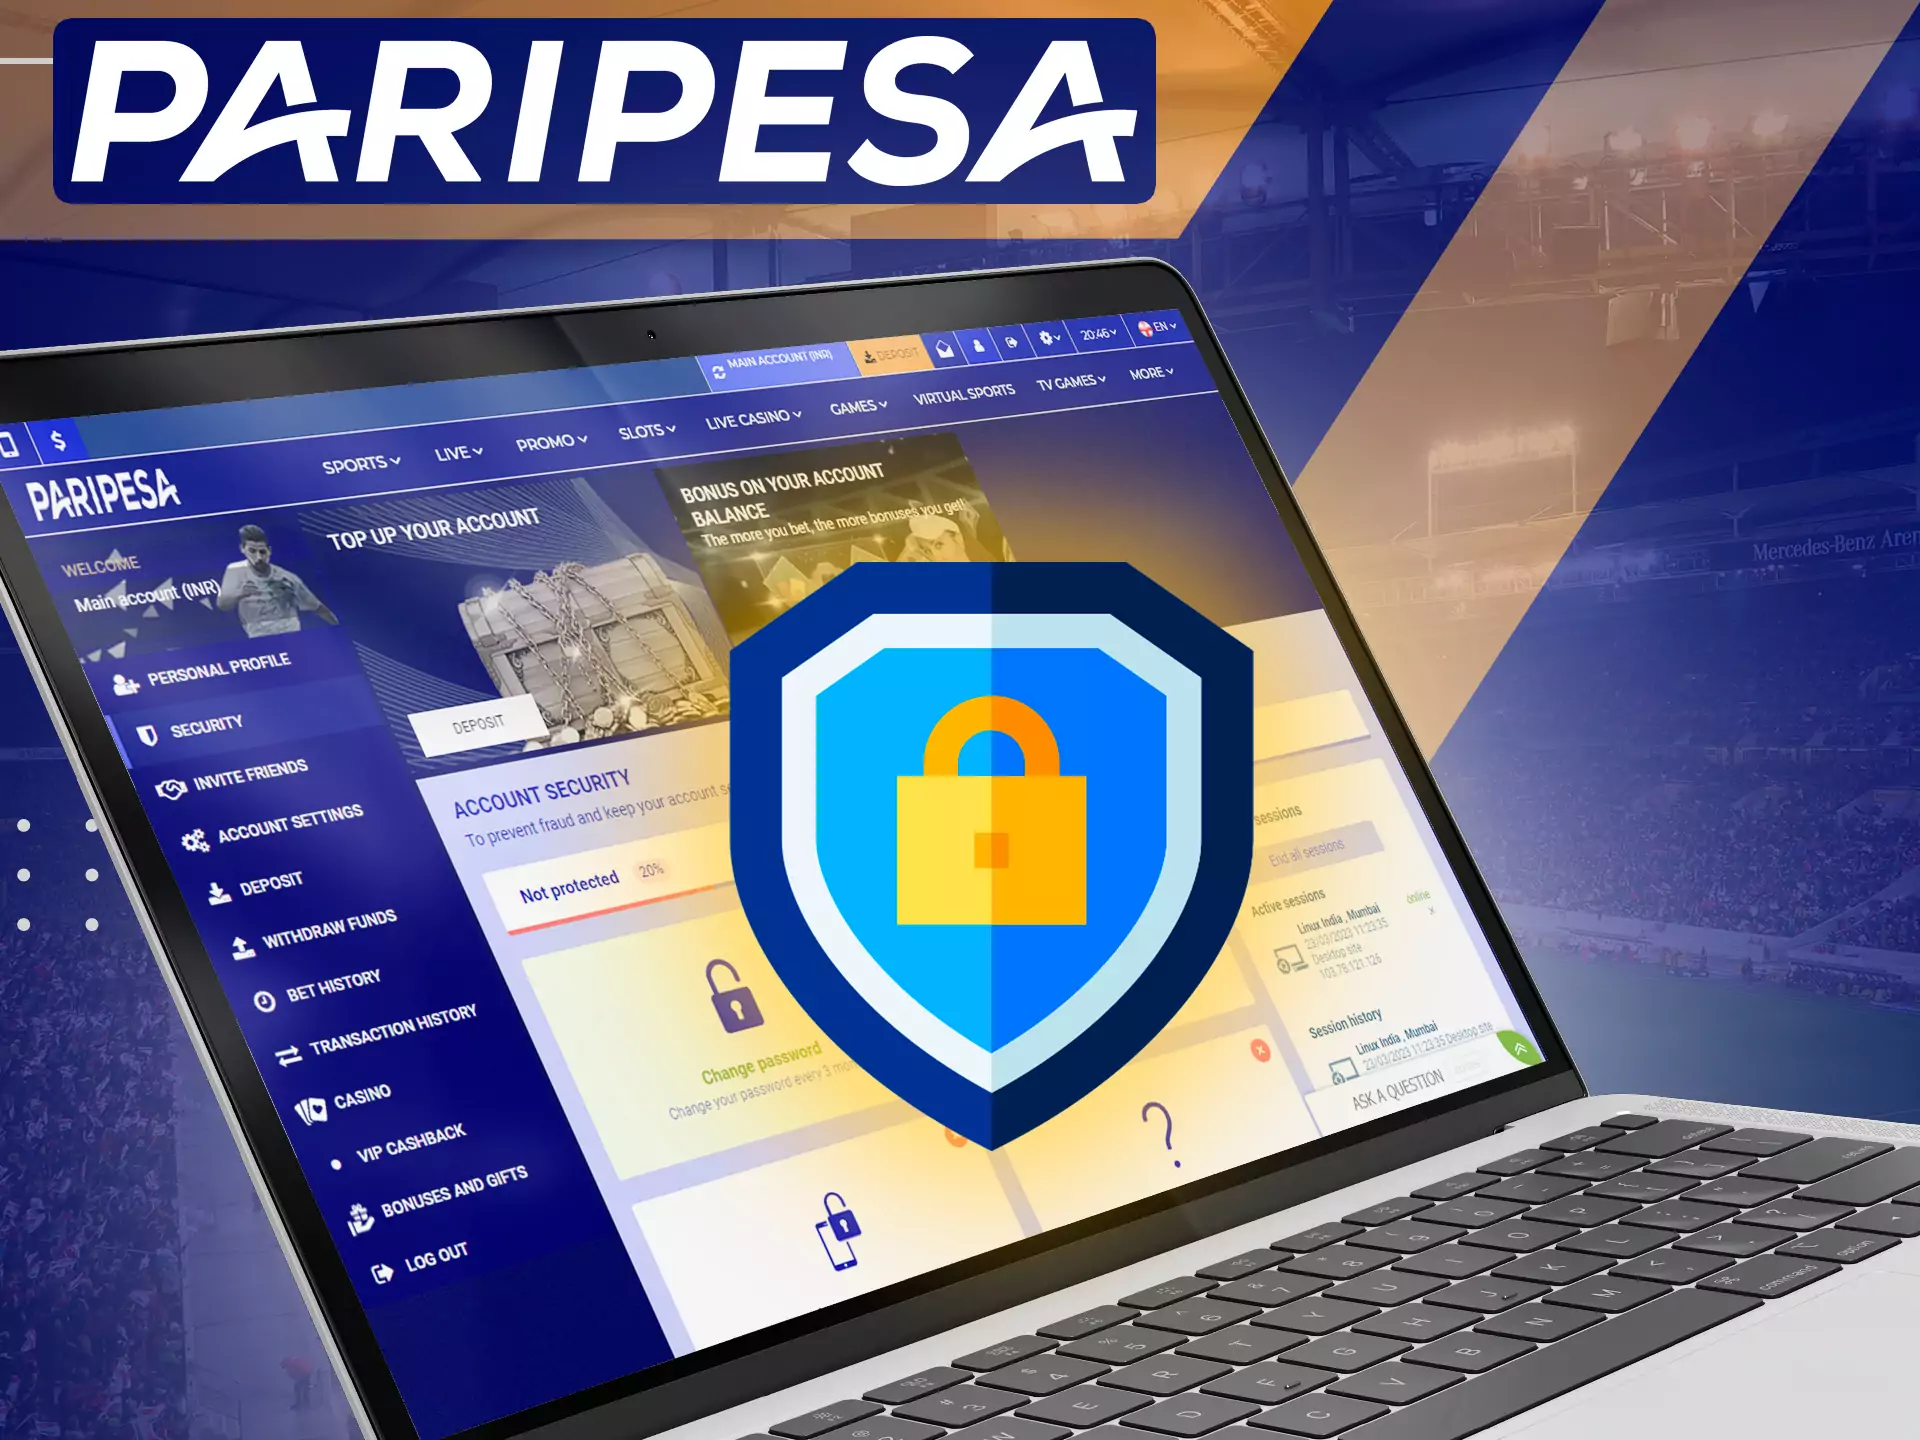 At Paripesa, you don't have to worry about the safety of your data, it's secure.